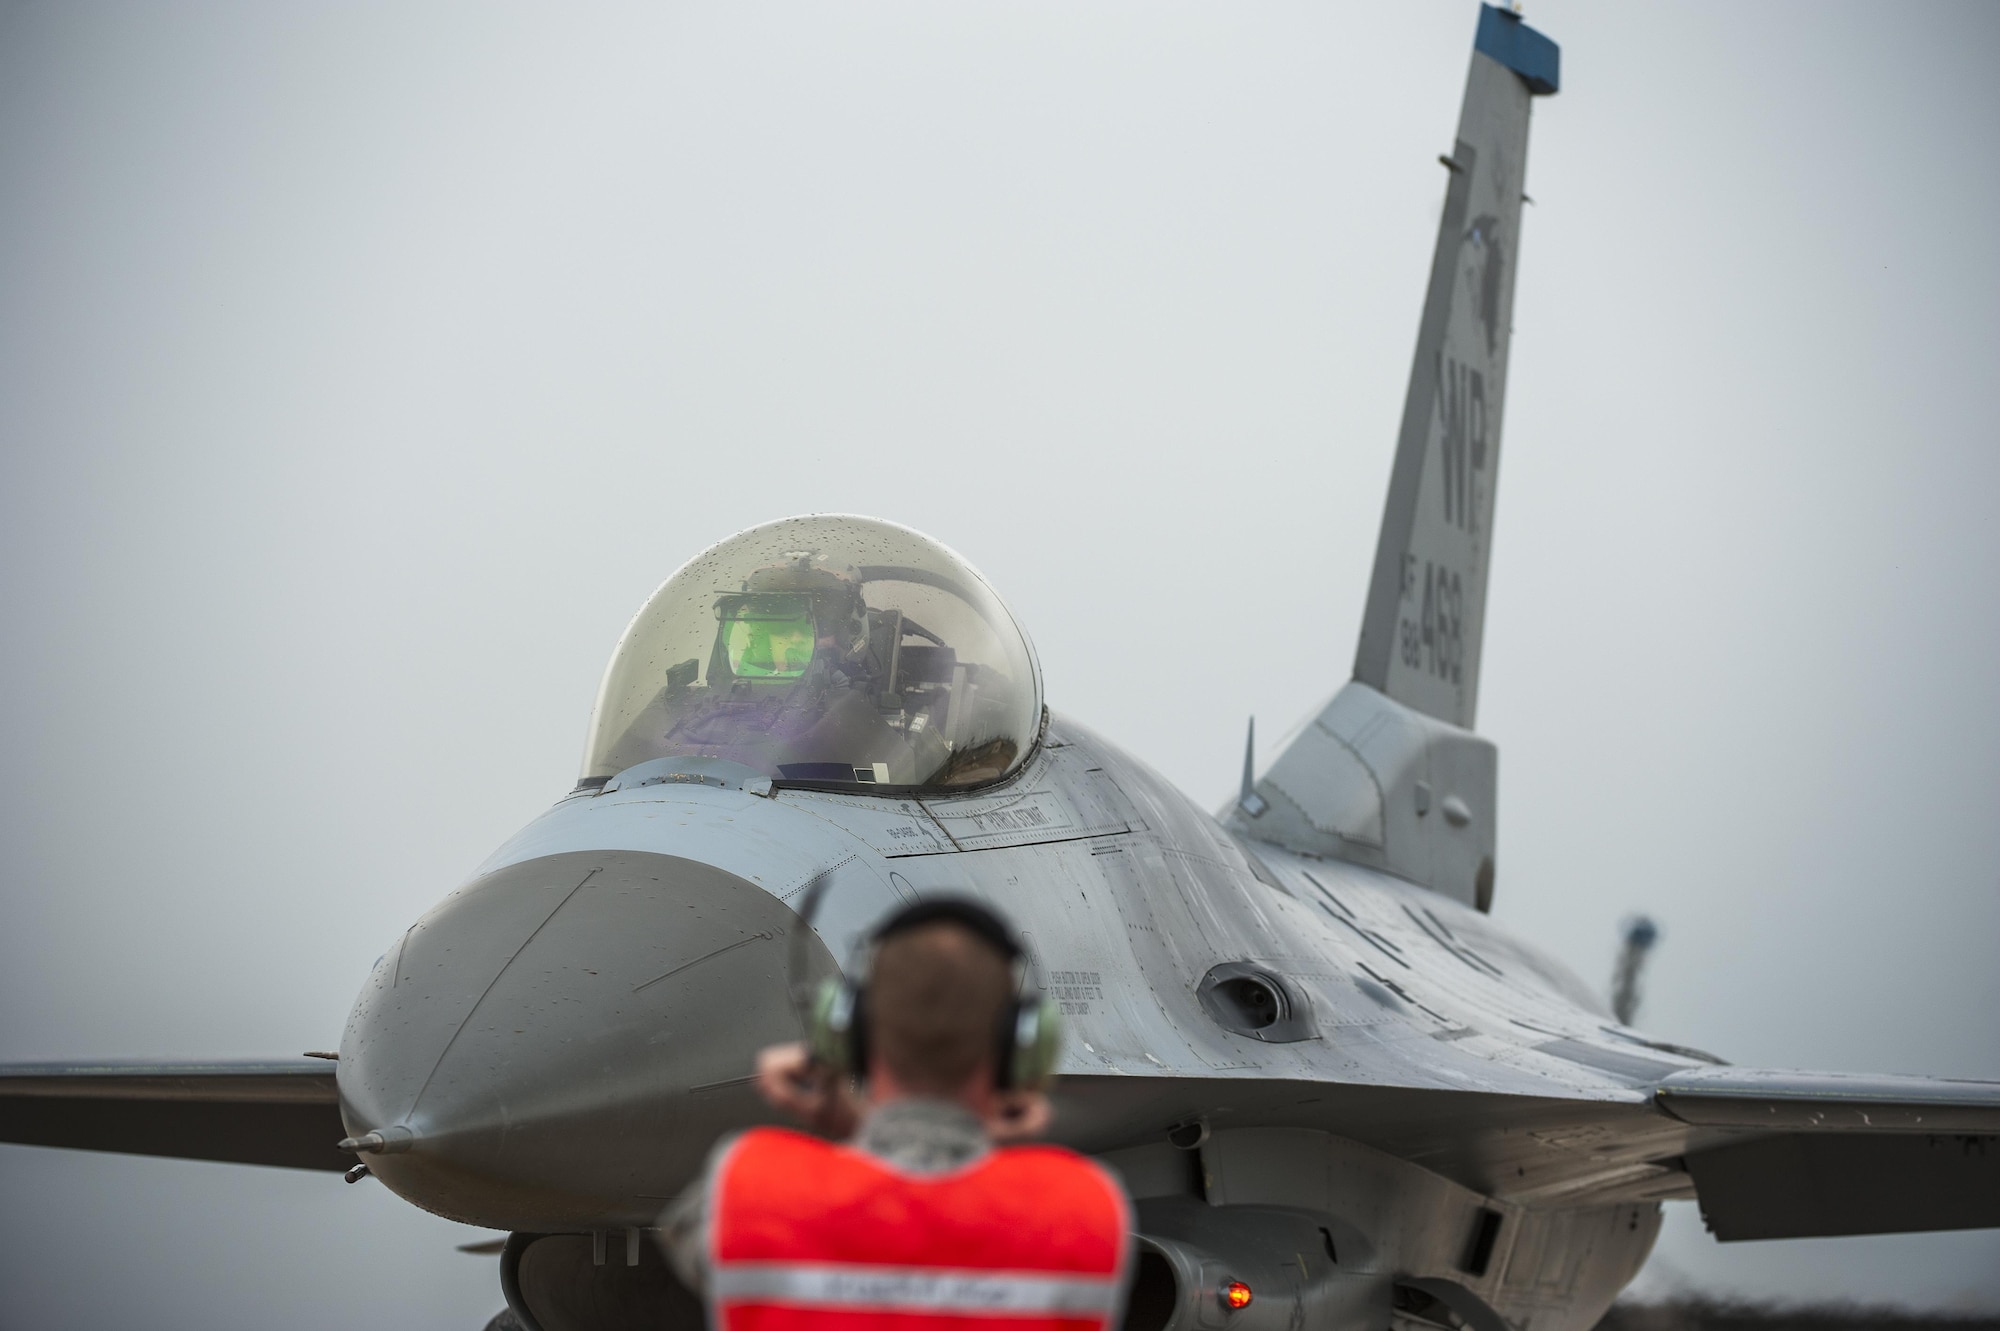 Tech. Sgt. Timothy Whitaker, 8th Aircraft Maintenance Squadron end-of-runway NCO in charge, marshals an F-16 Fighting Falcon during Buddy Wing 15-7 at Kunsan Air Base, Republic of Korea, Nov. 17, 2015. In an effort to enhance U.S. and ROKAF combat capability, Buddy Wing training events are conducted multiple times throughout the year on the peninsula to sharpen interoperability between the allied forces so that if need be, they are always ready to fight as a combined force. (U.S. Air Force photo by Staff Sgt. Nick Wilson/Released)